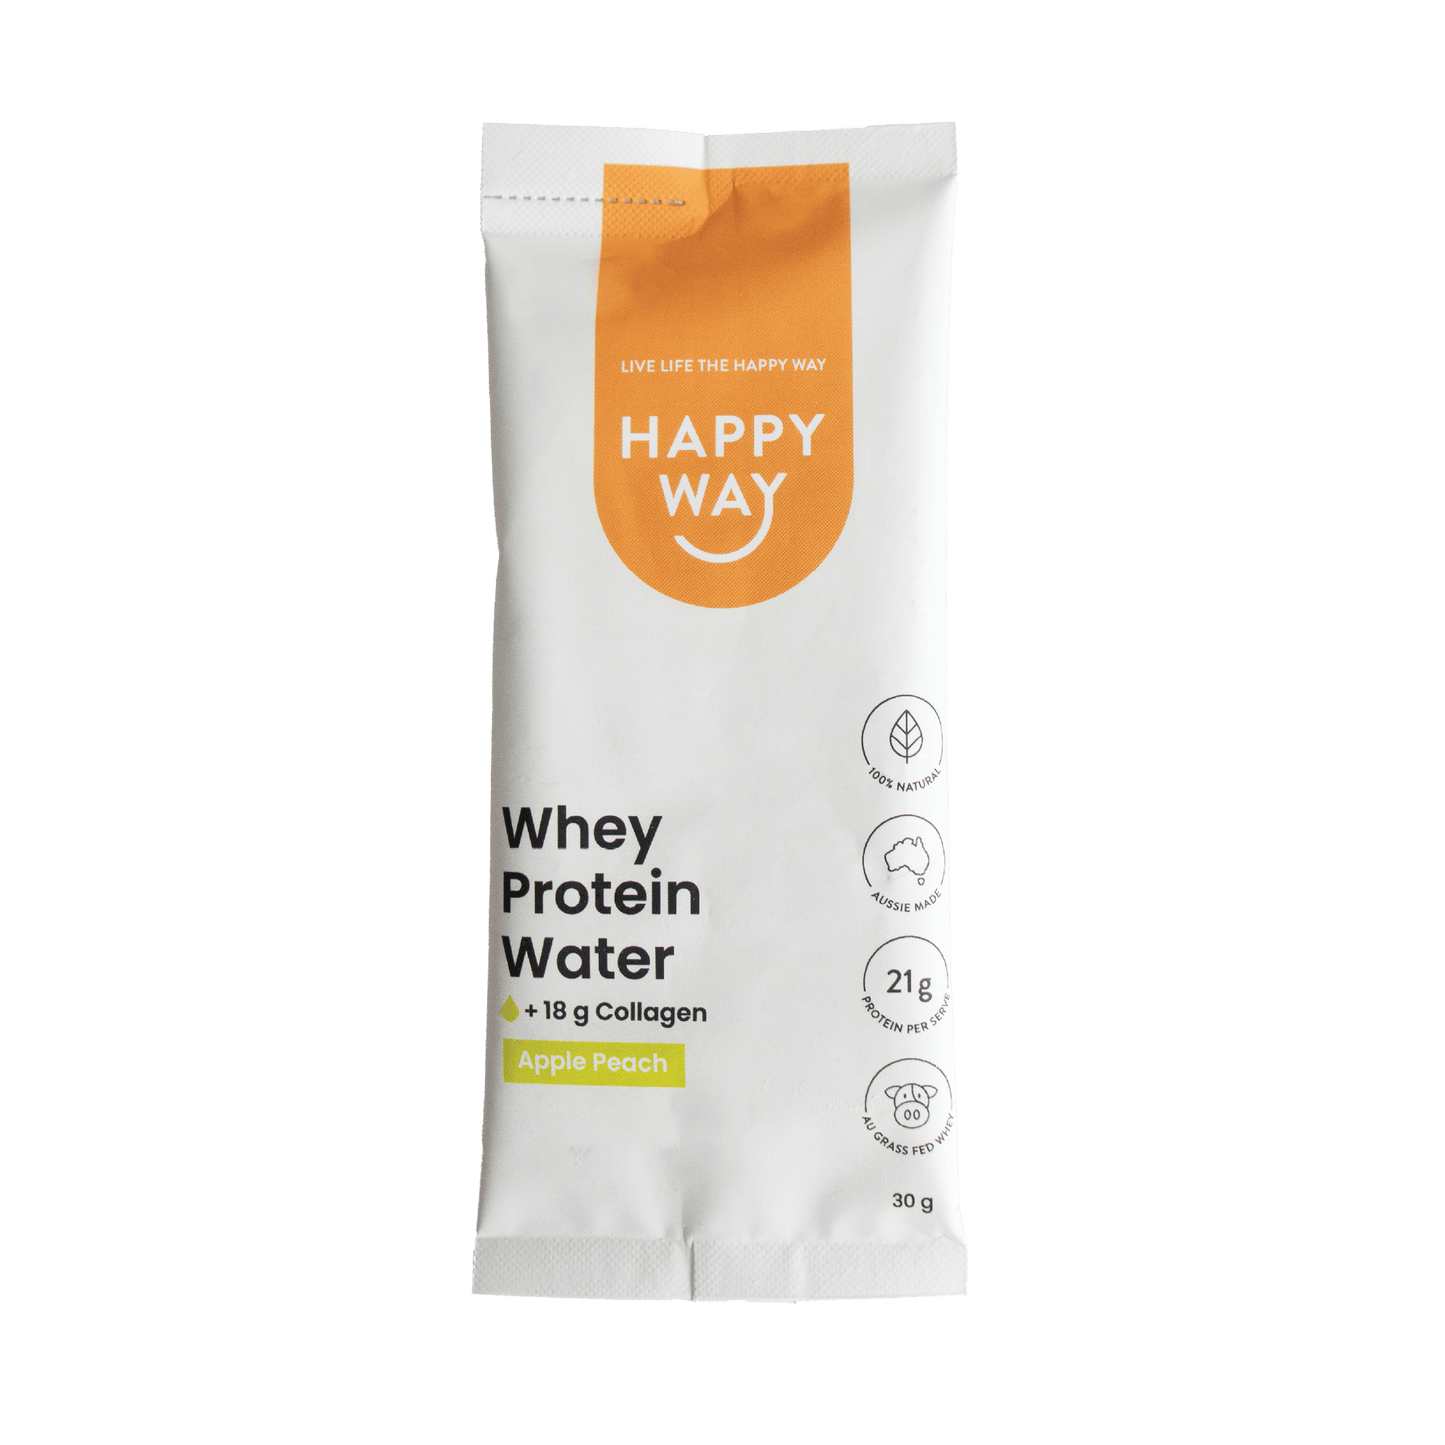 Whey Protein Water Powder Sample Pack 30g